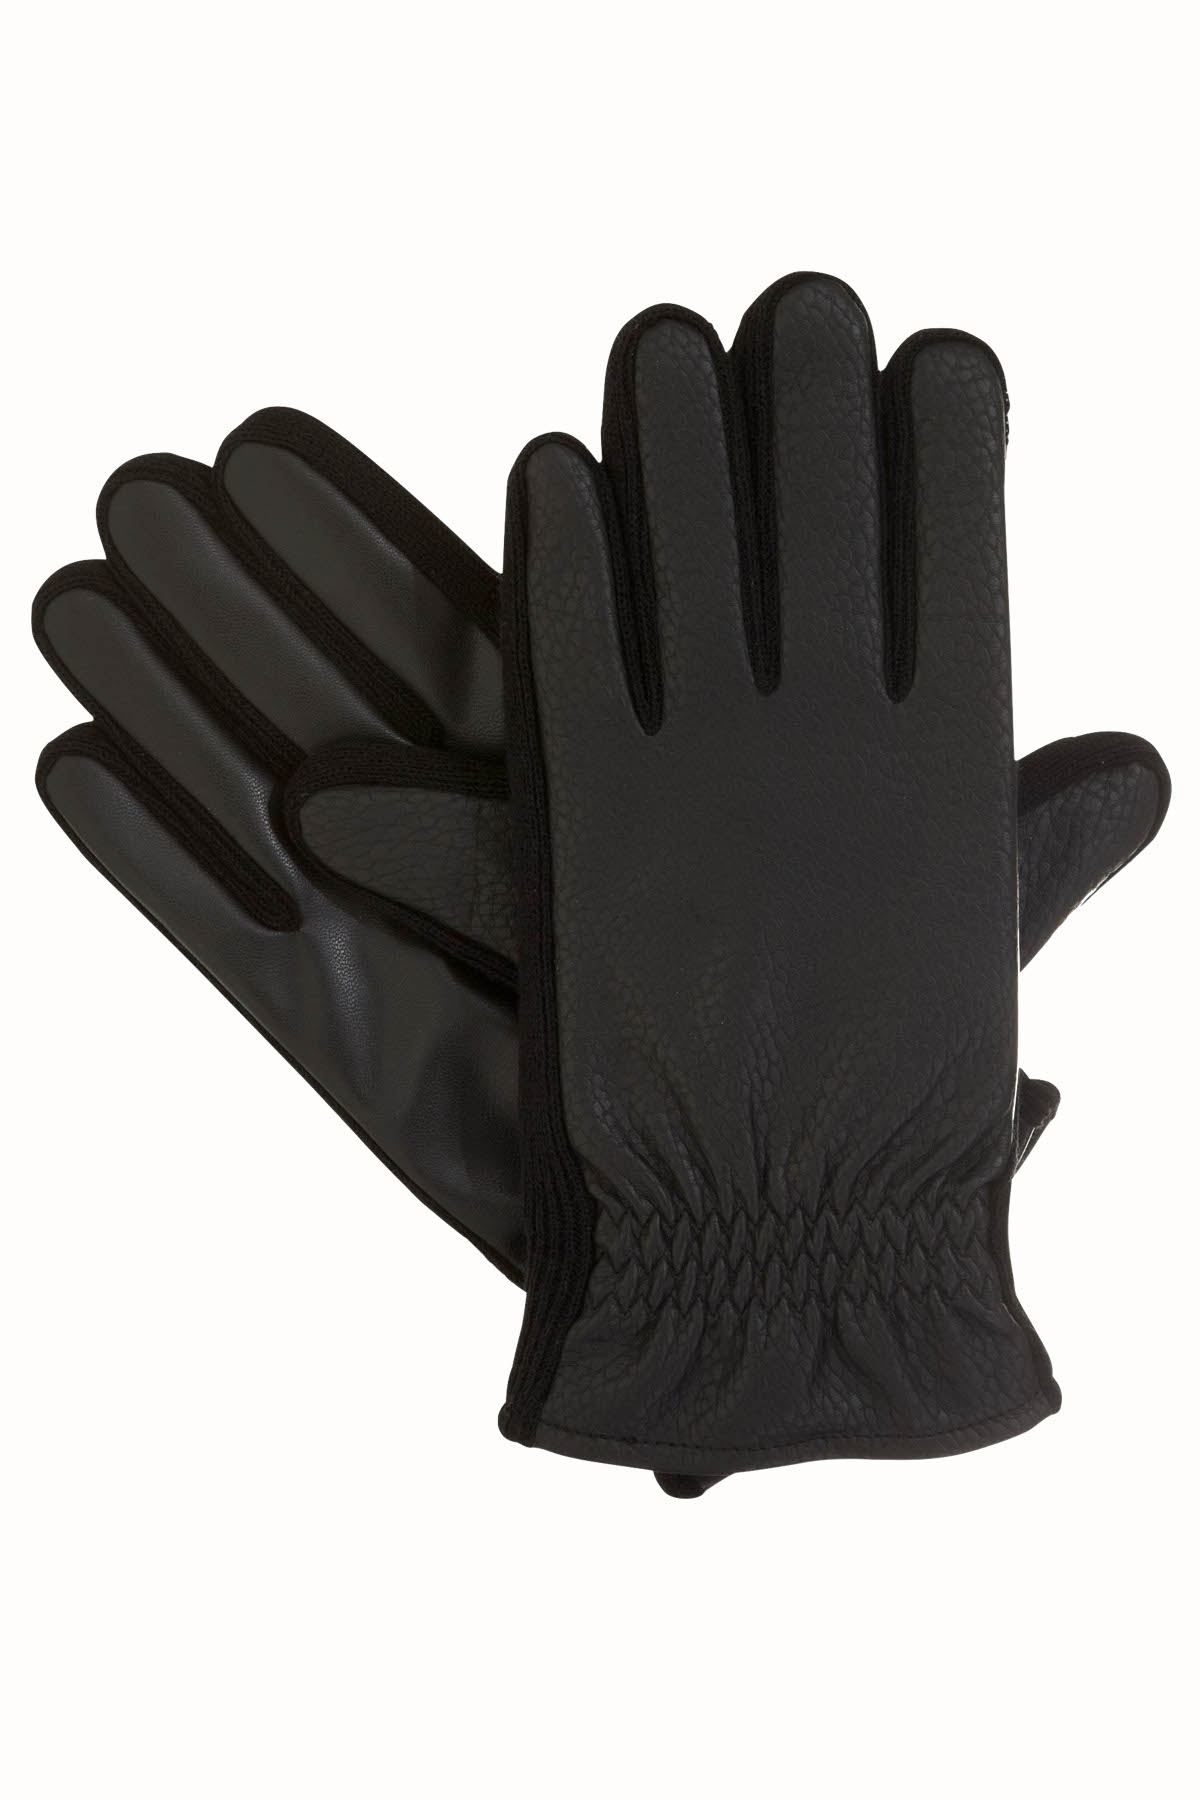 Isotoner Signature Black Thermaflex™ Smartouch Textured Stretch Glove With Gathered Wrist